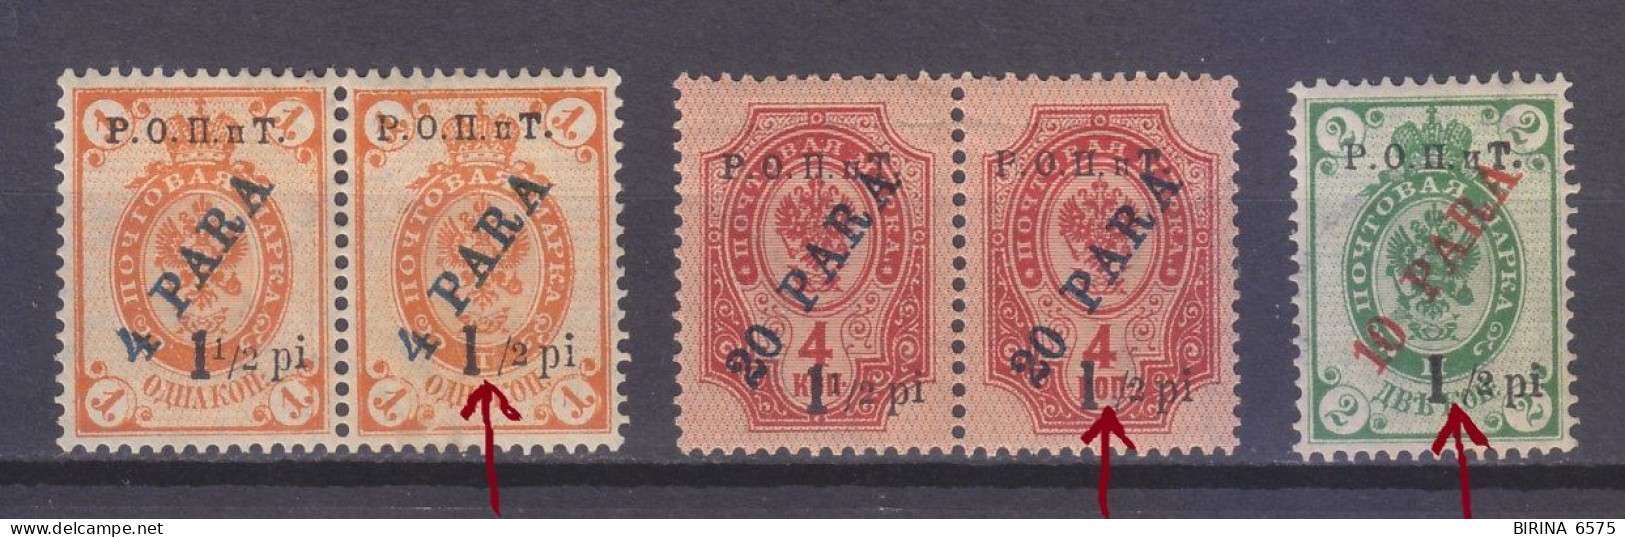 Russian PO In Levant. ROPIT. Varieties Of Surcharge - Without "1" In Numerator - M - Turkish Empire